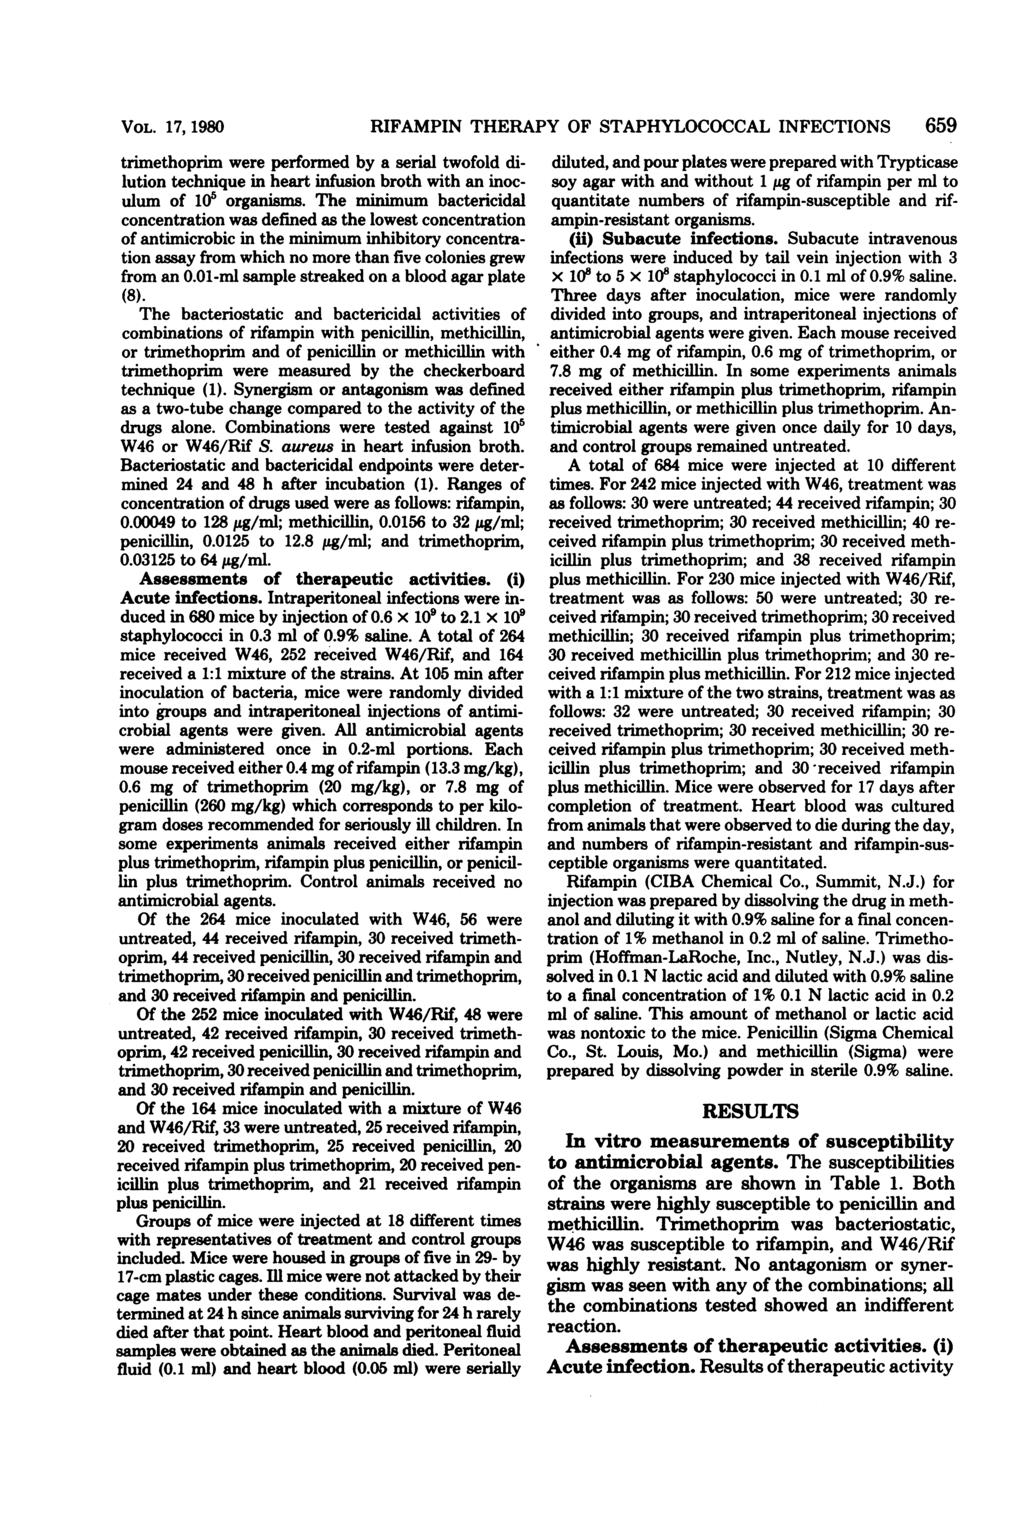 VOL. 17, 1980 trimethoprim were performed by a serial twofold dilution technique in heart infusion broth with an inoculum of 105 organisms.